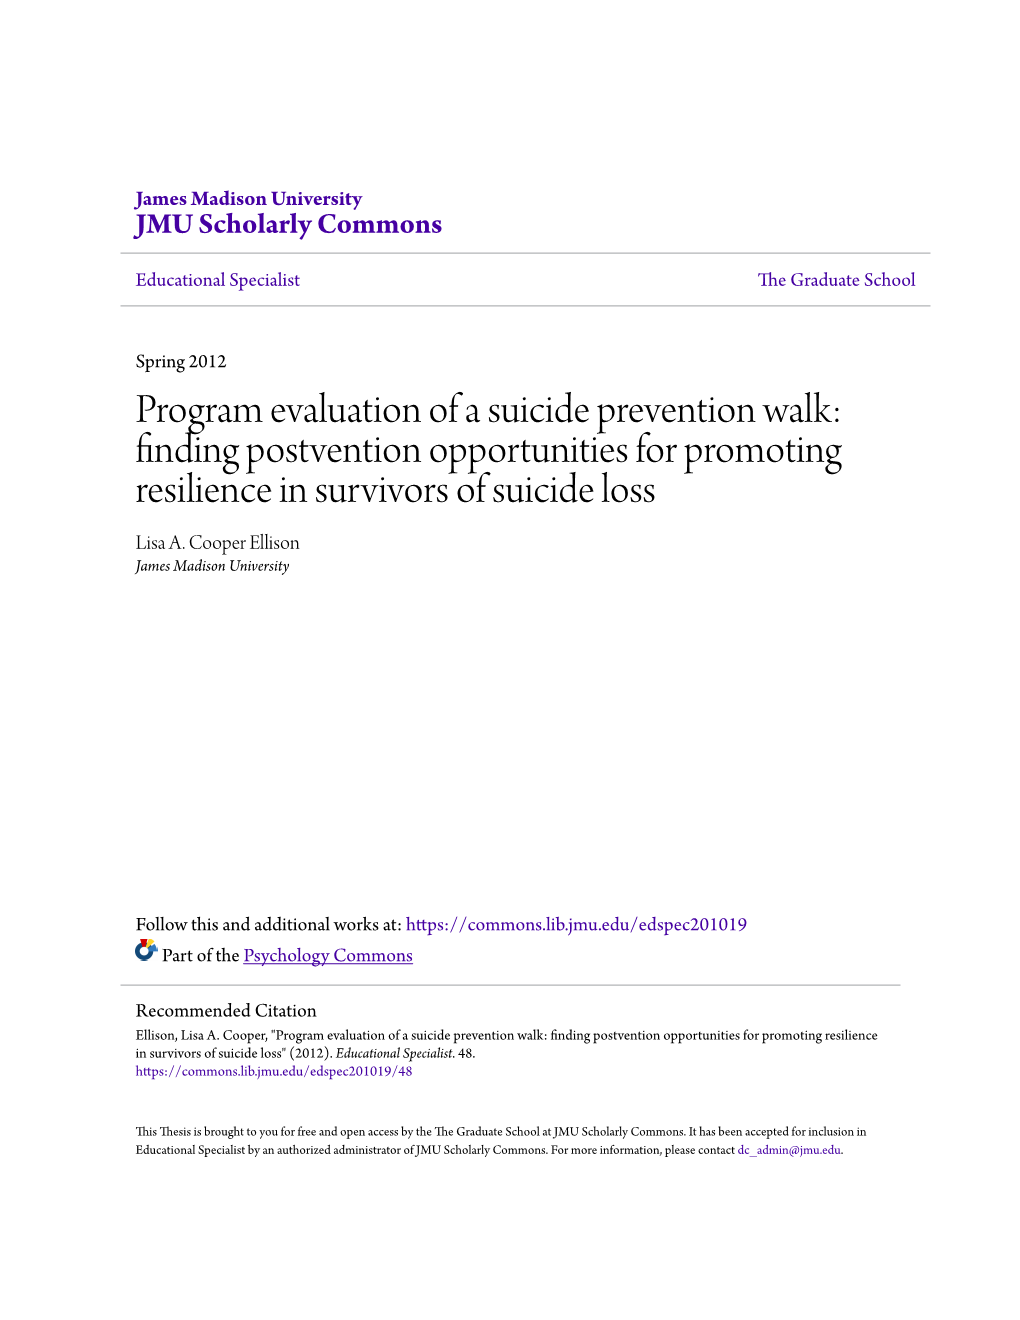 Program Evaluation of a Suicide Prevention Walk: Finding Postvention Opportunities for Promoting Resilience in Survivors of Suicide Loss Lisa A